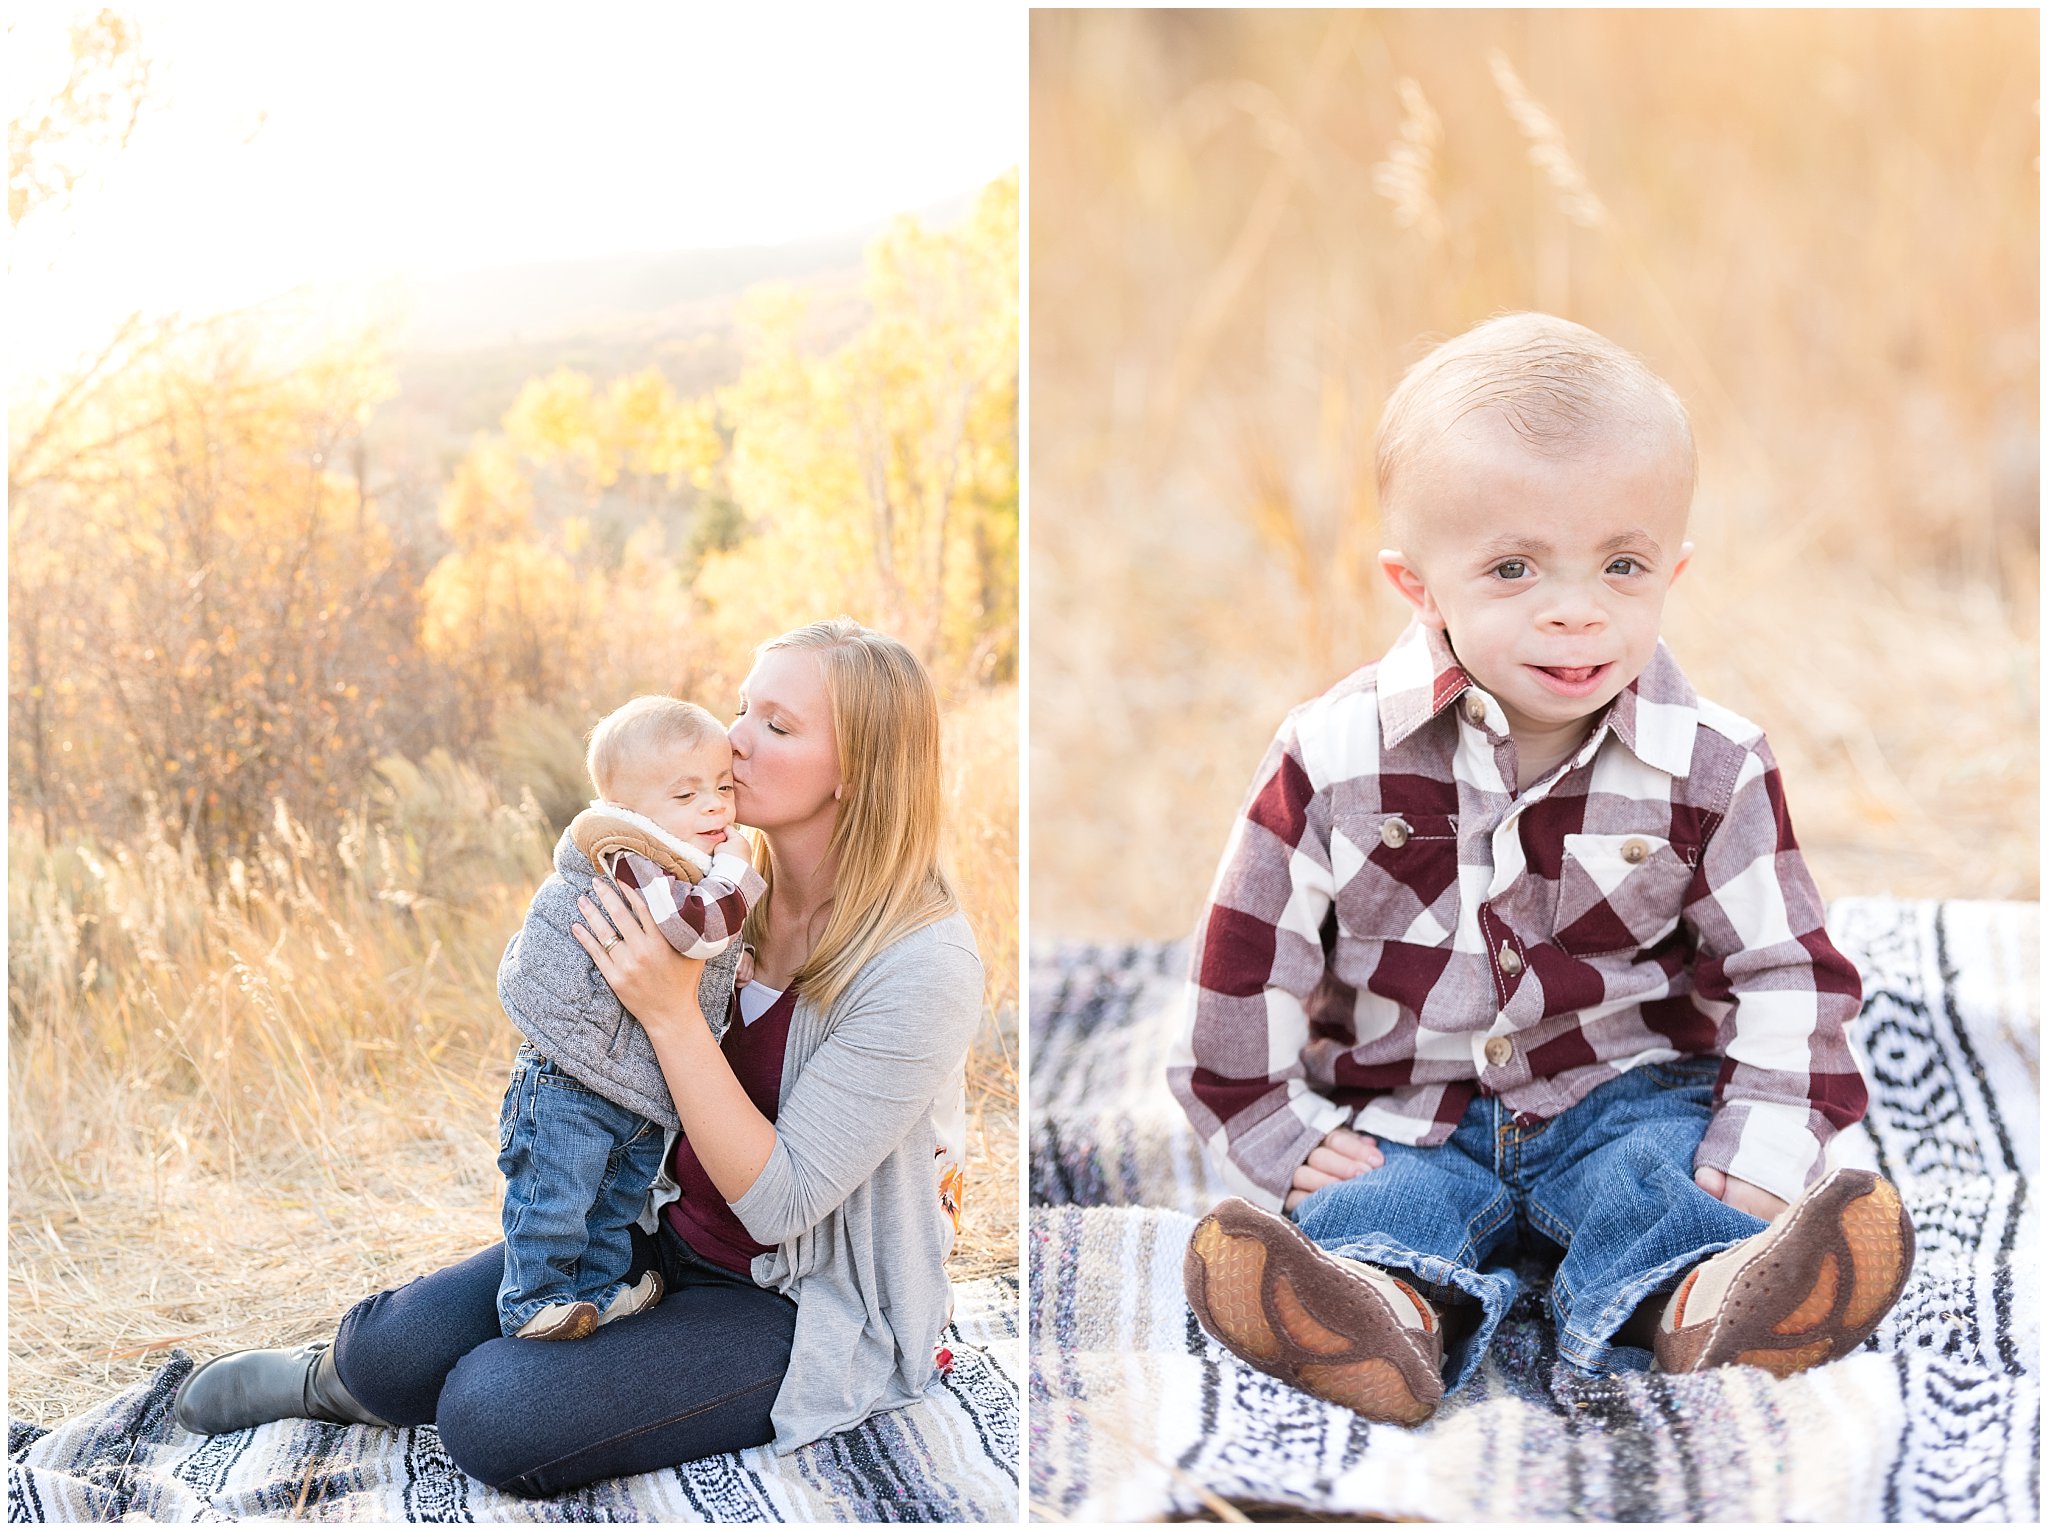 Mom and baby portrait in the fall leaves | Fall family photo session at Snowbasin | Snowbasin Resort | Jessie and Dallin Photography